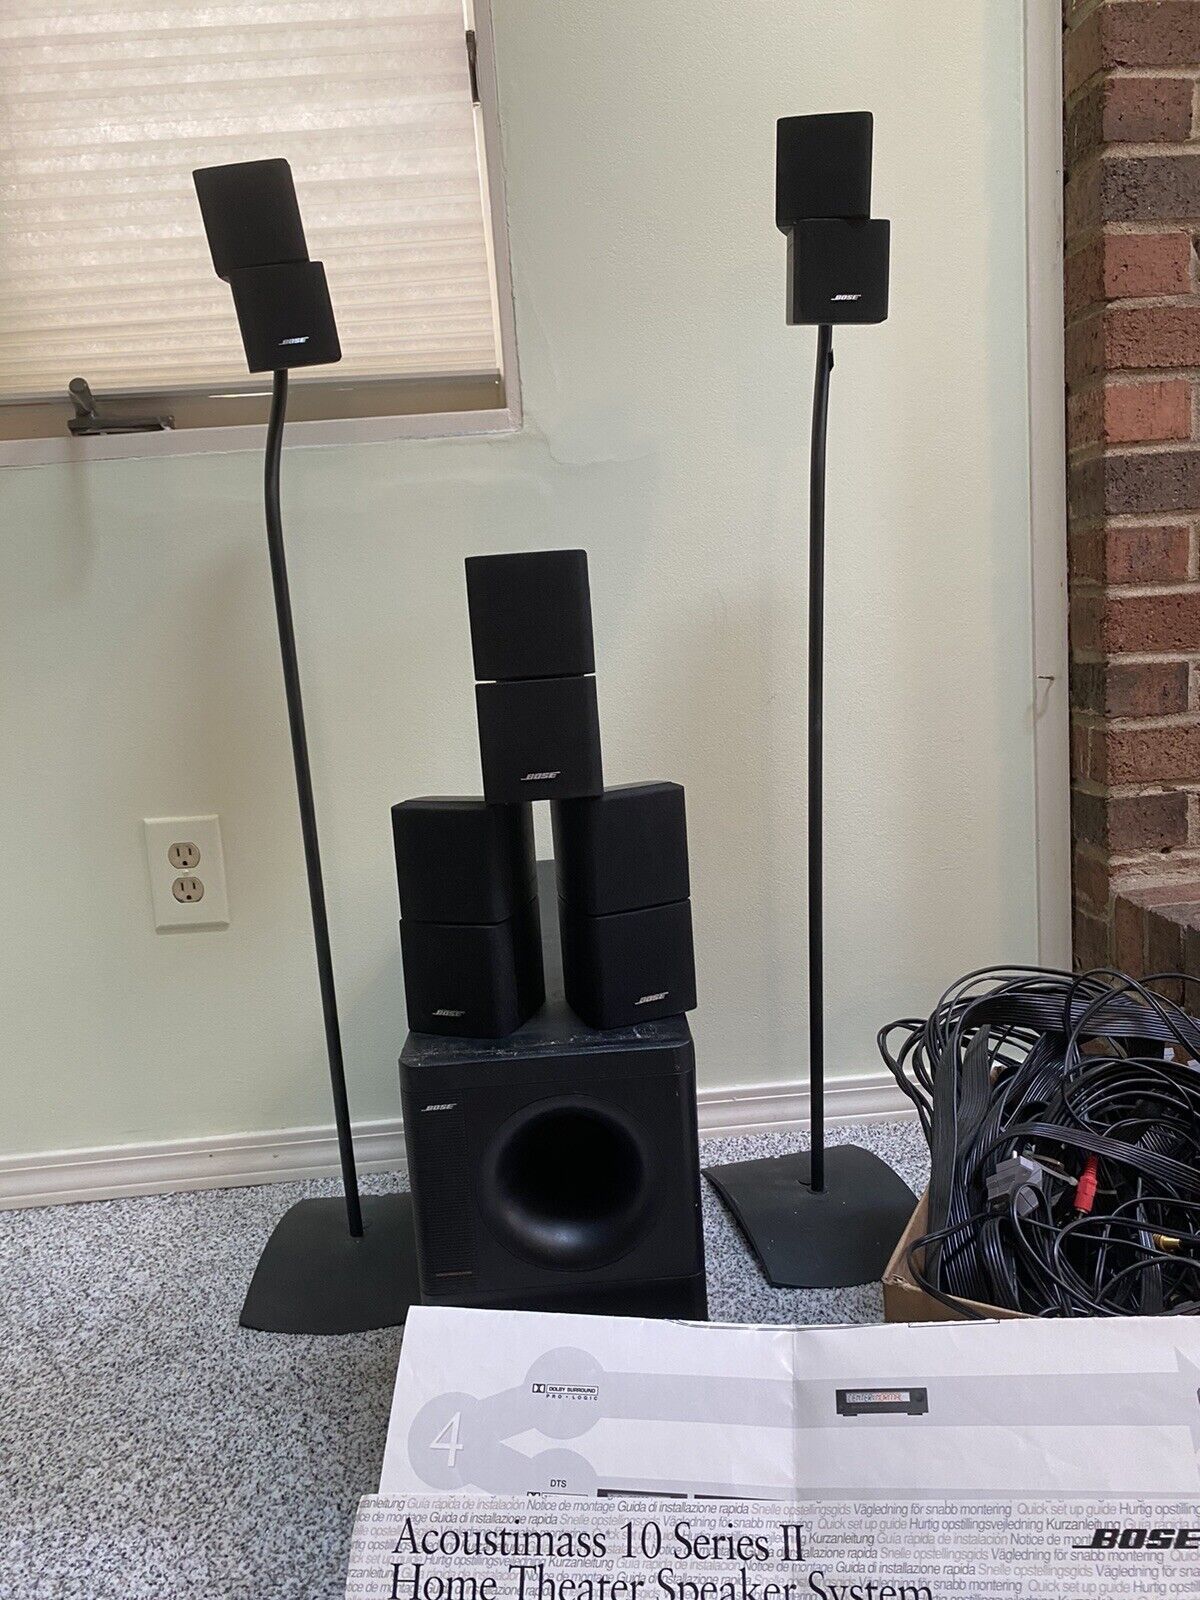 Bose “Acoustimass 10” Home Theater System